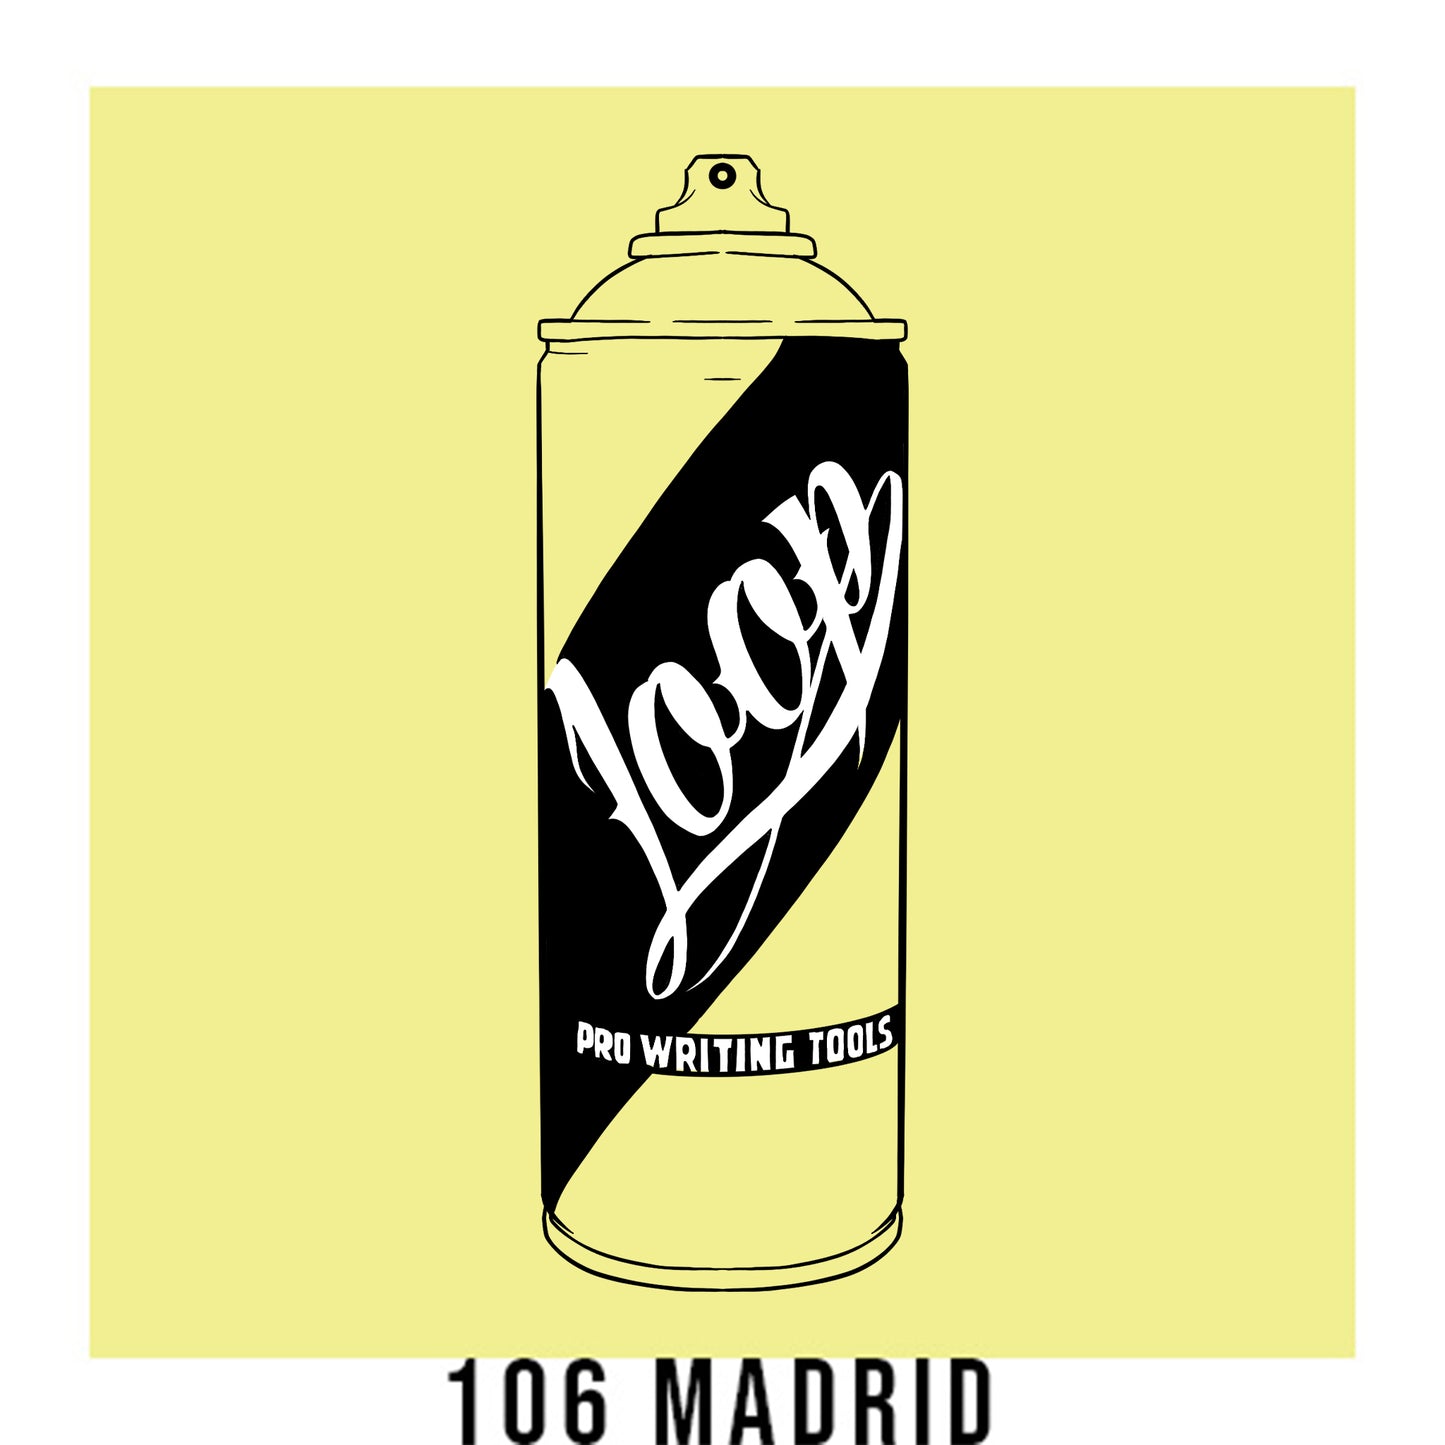 A black outline drawing of a pale yellow spray paint can with the word "Loop" written on the face in script. The background is a color swatch of the same yellow with a white border with the words "106 Madrid" at the bottom.